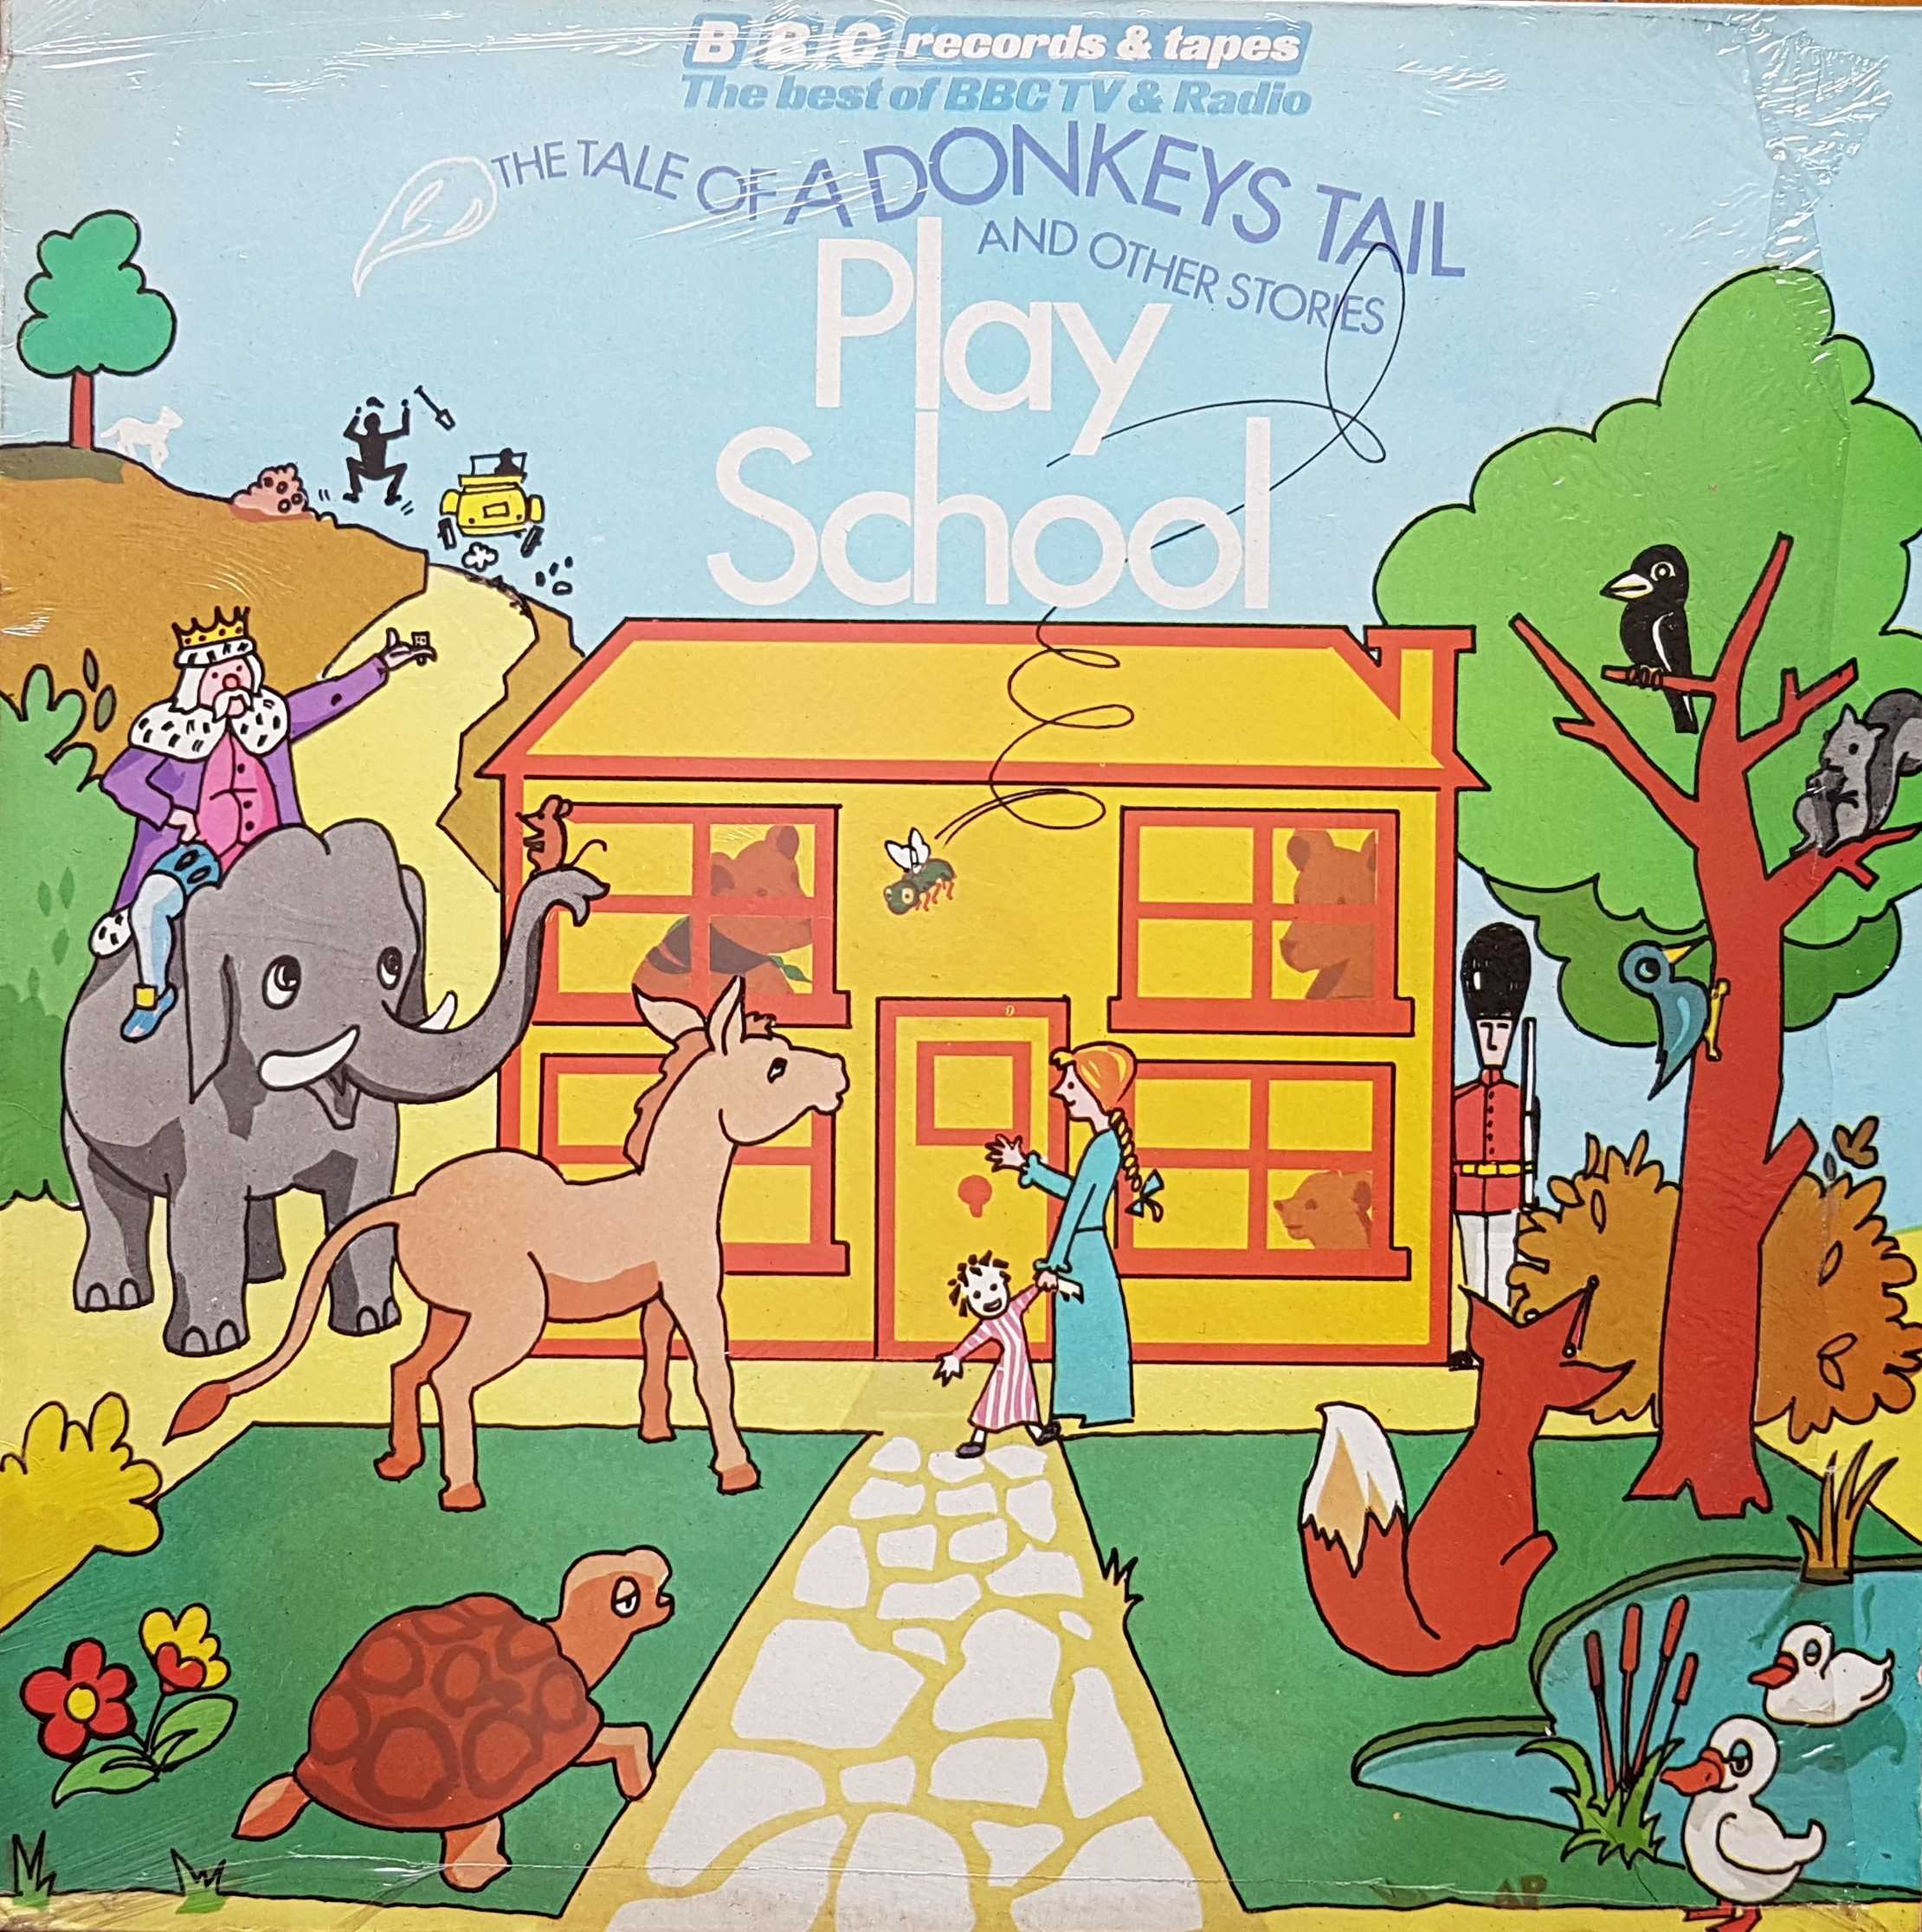 Picture of REC 232 Tale of a donkeys tail and other play school stories by artist Various from the BBC albums - Records and Tapes library